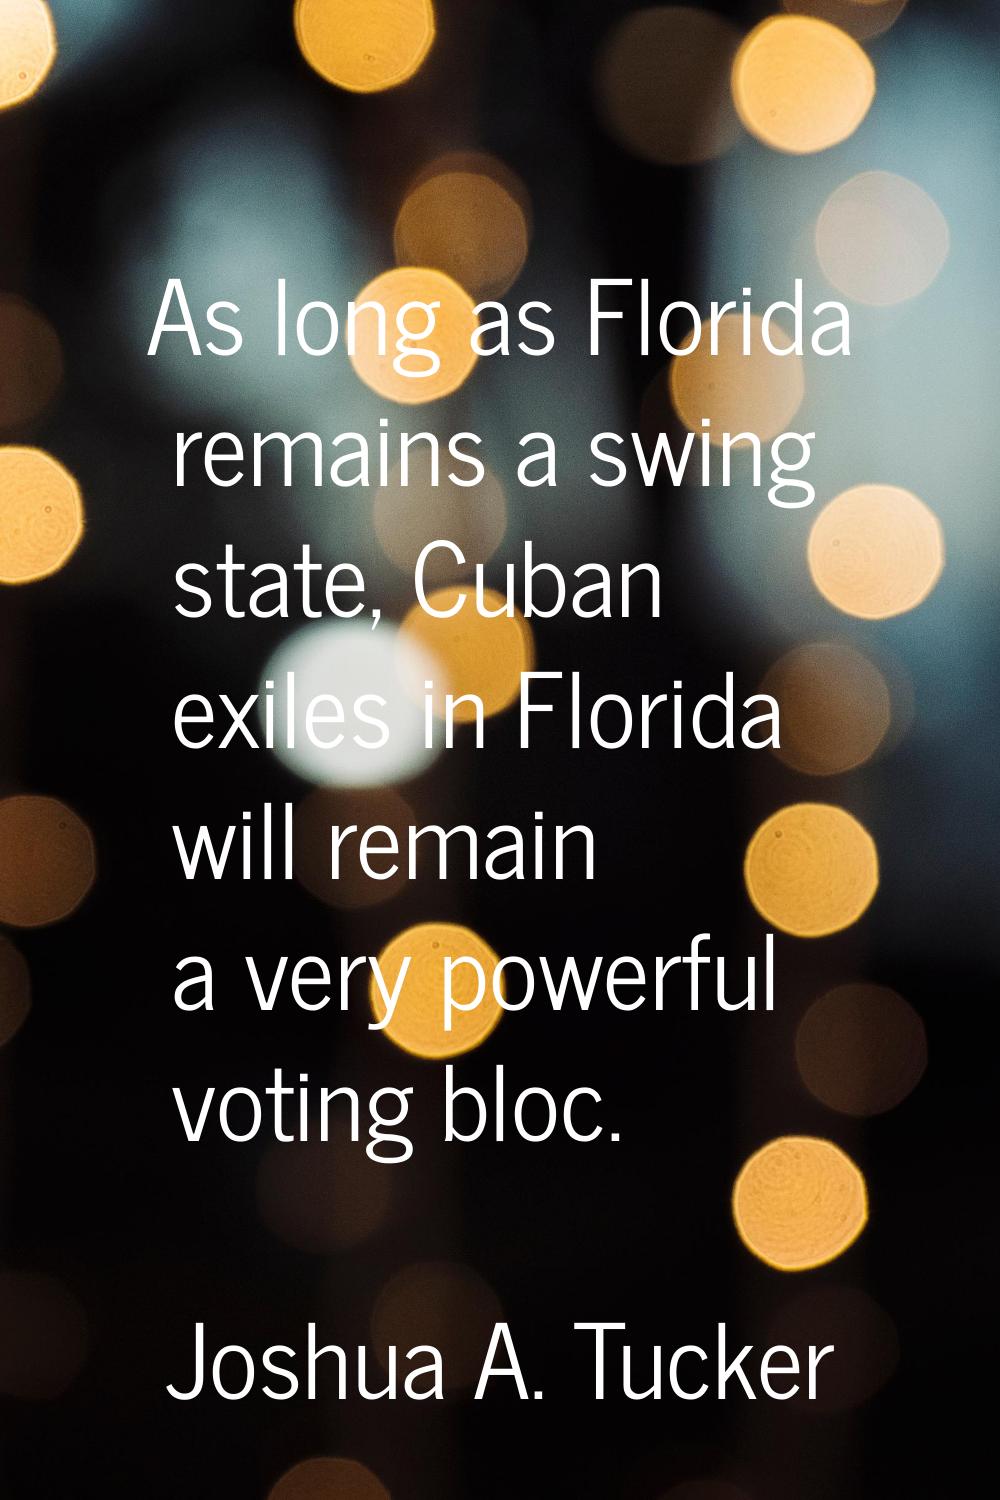 As long as Florida remains a swing state, Cuban exiles in Florida will remain a very powerful votin